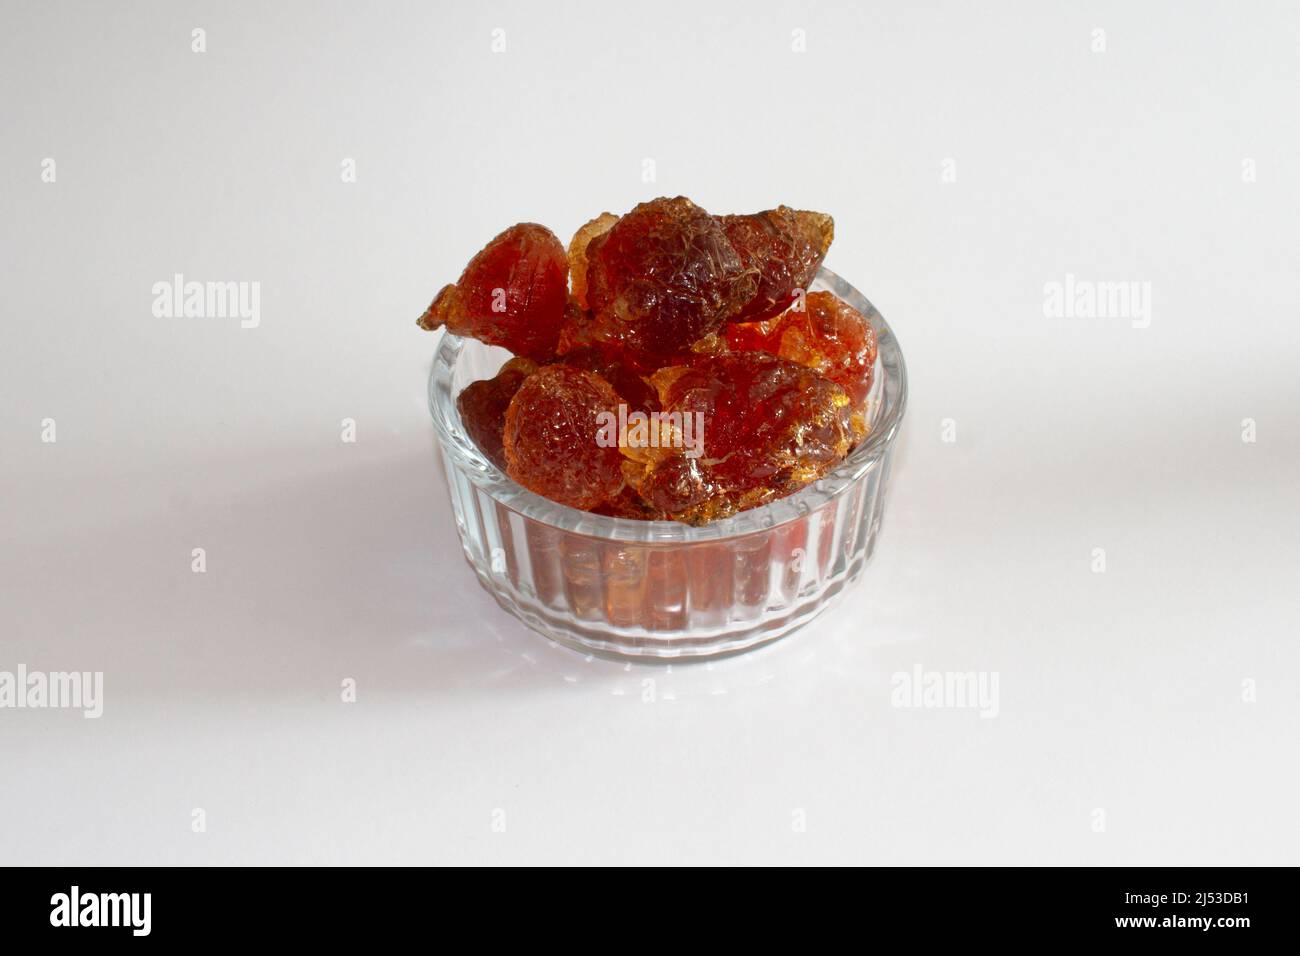 gum arabic  acacia senegal chunky pieces in glass bowl from top on white background Stock Photo